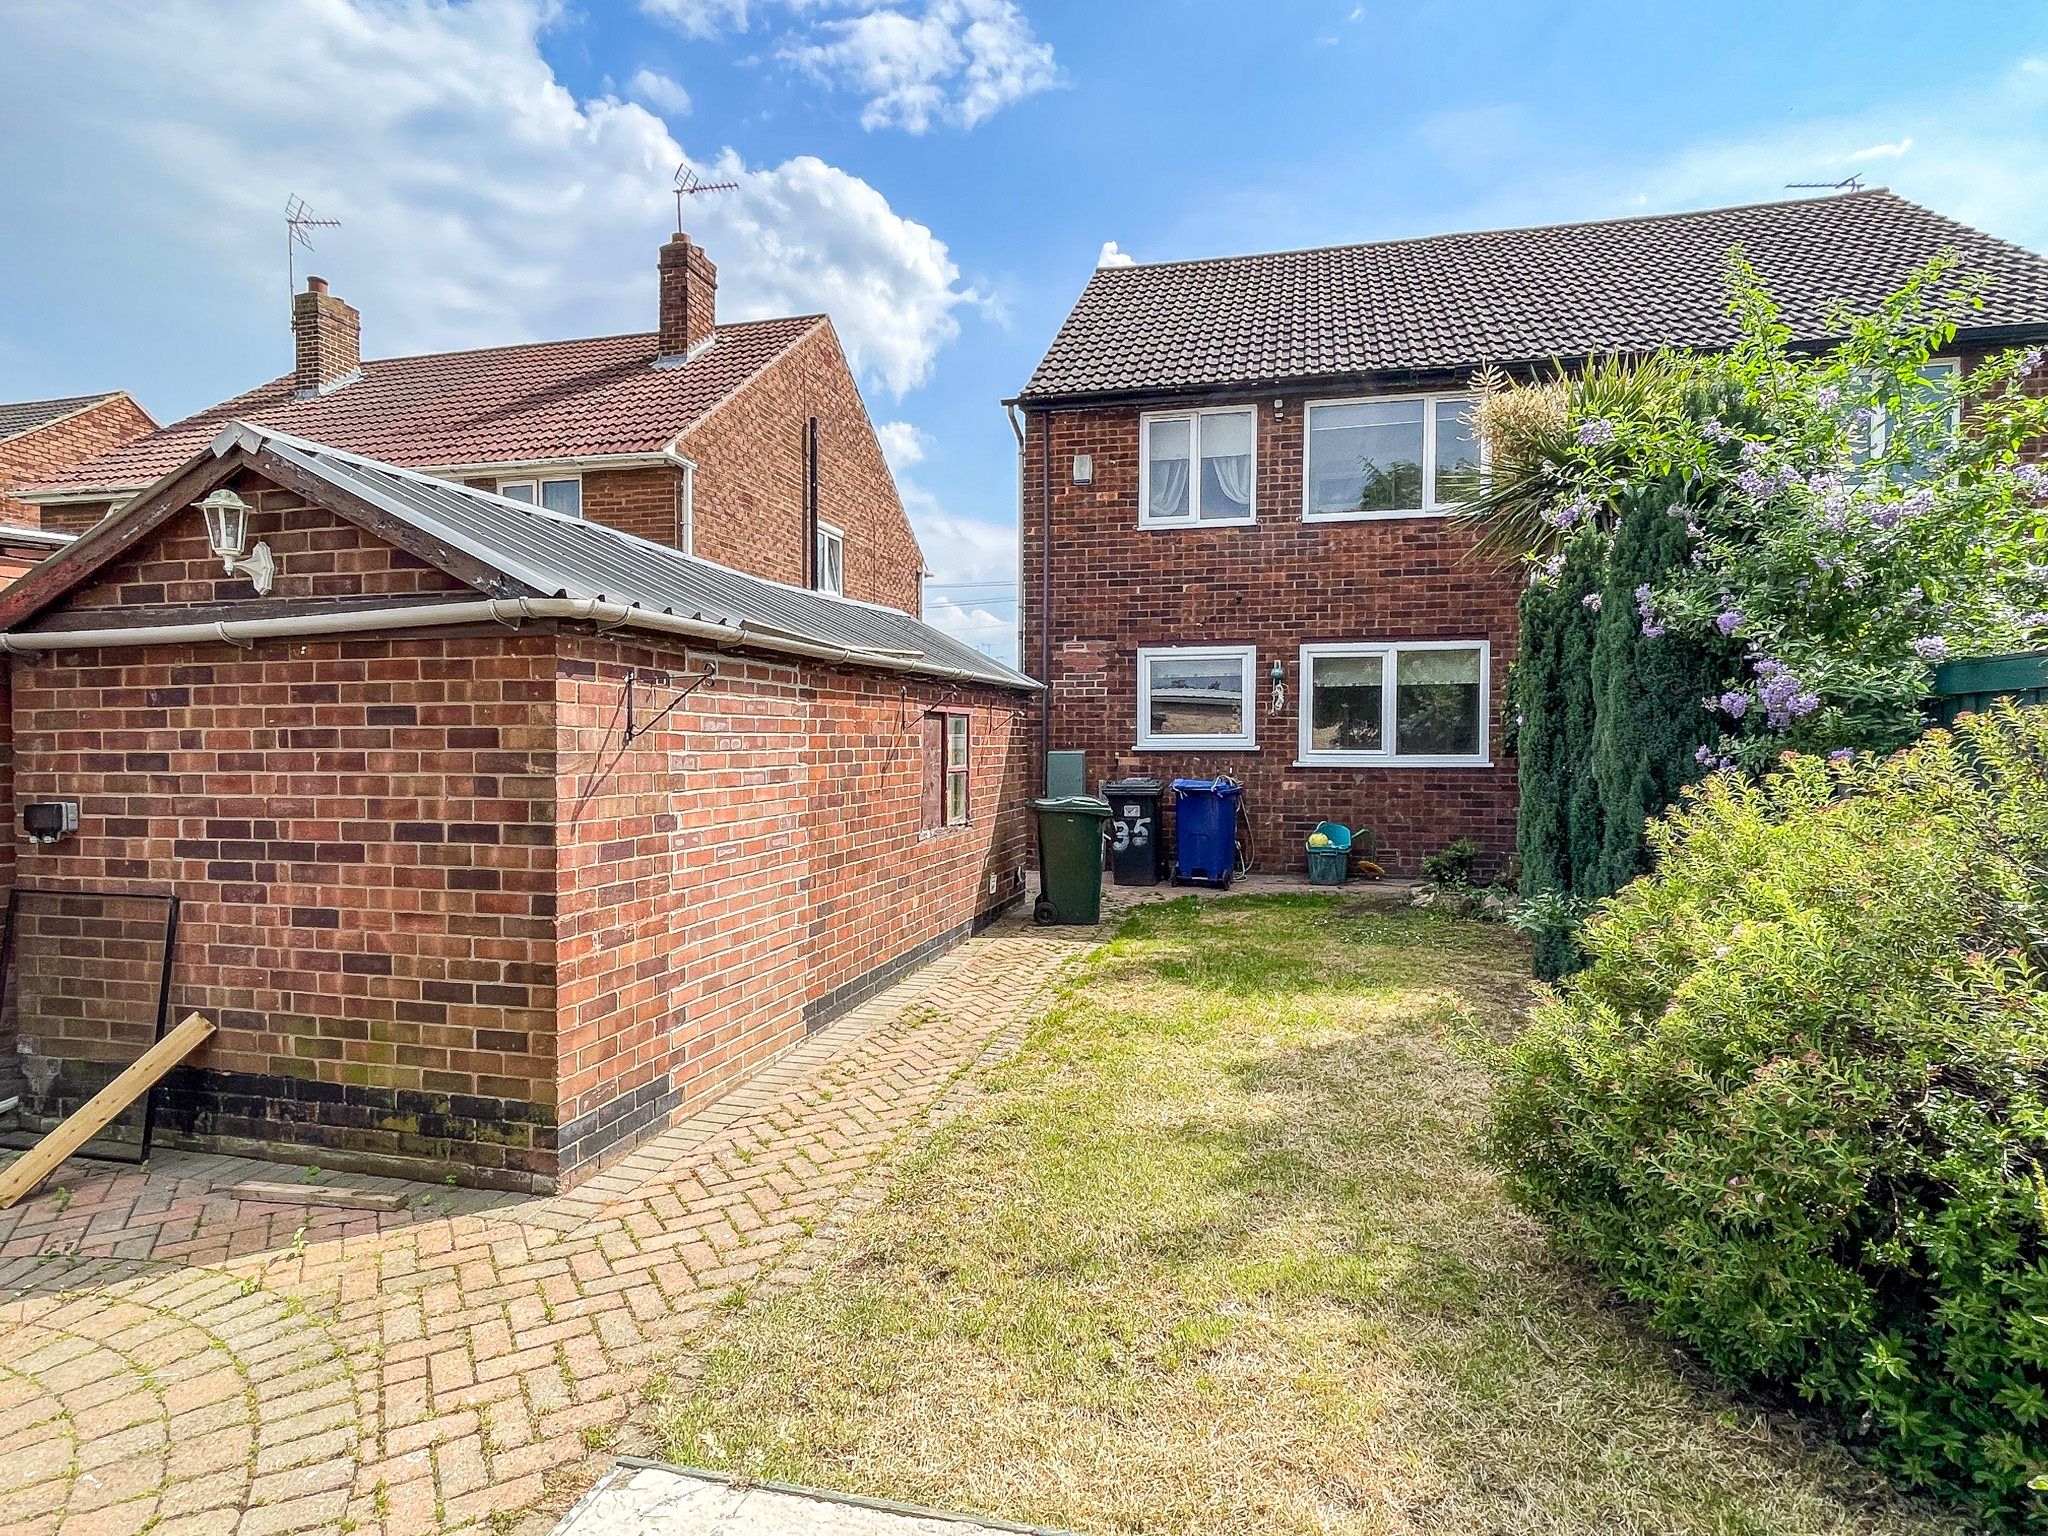 Windsor Walk, Scawsby, Doncaster, DN5 8NQ